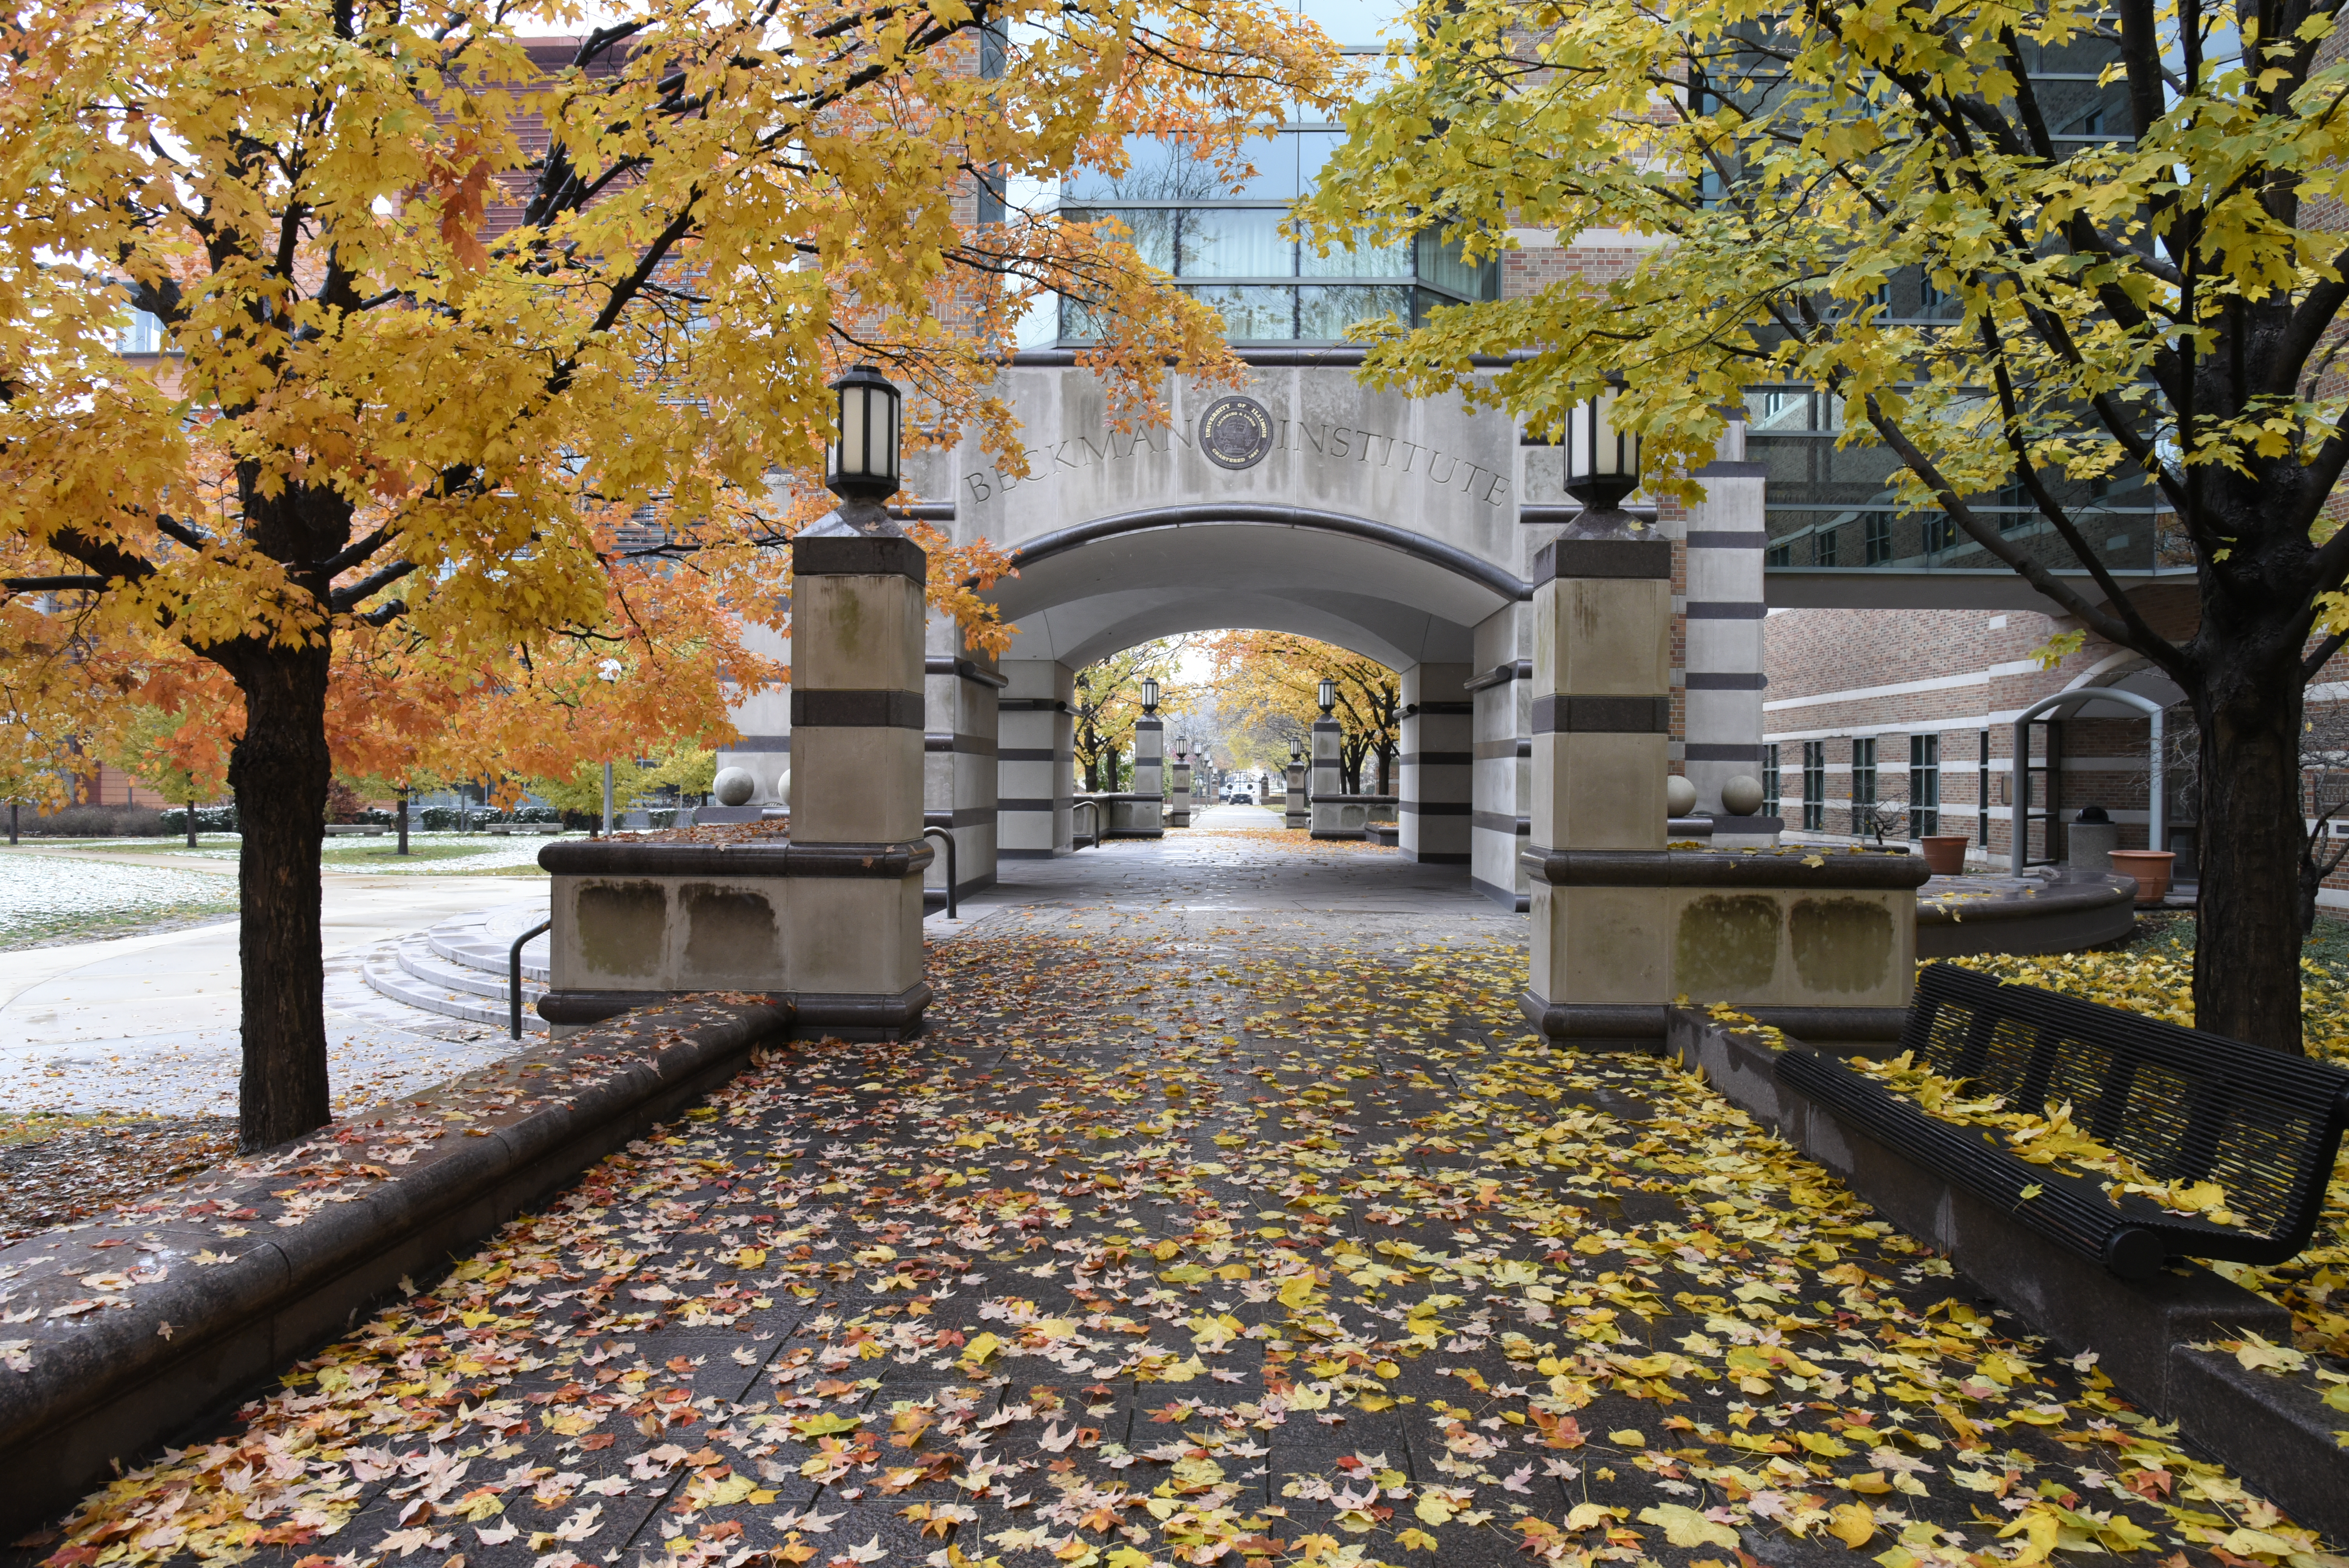 Beckman Institute outdoors brick path in fall